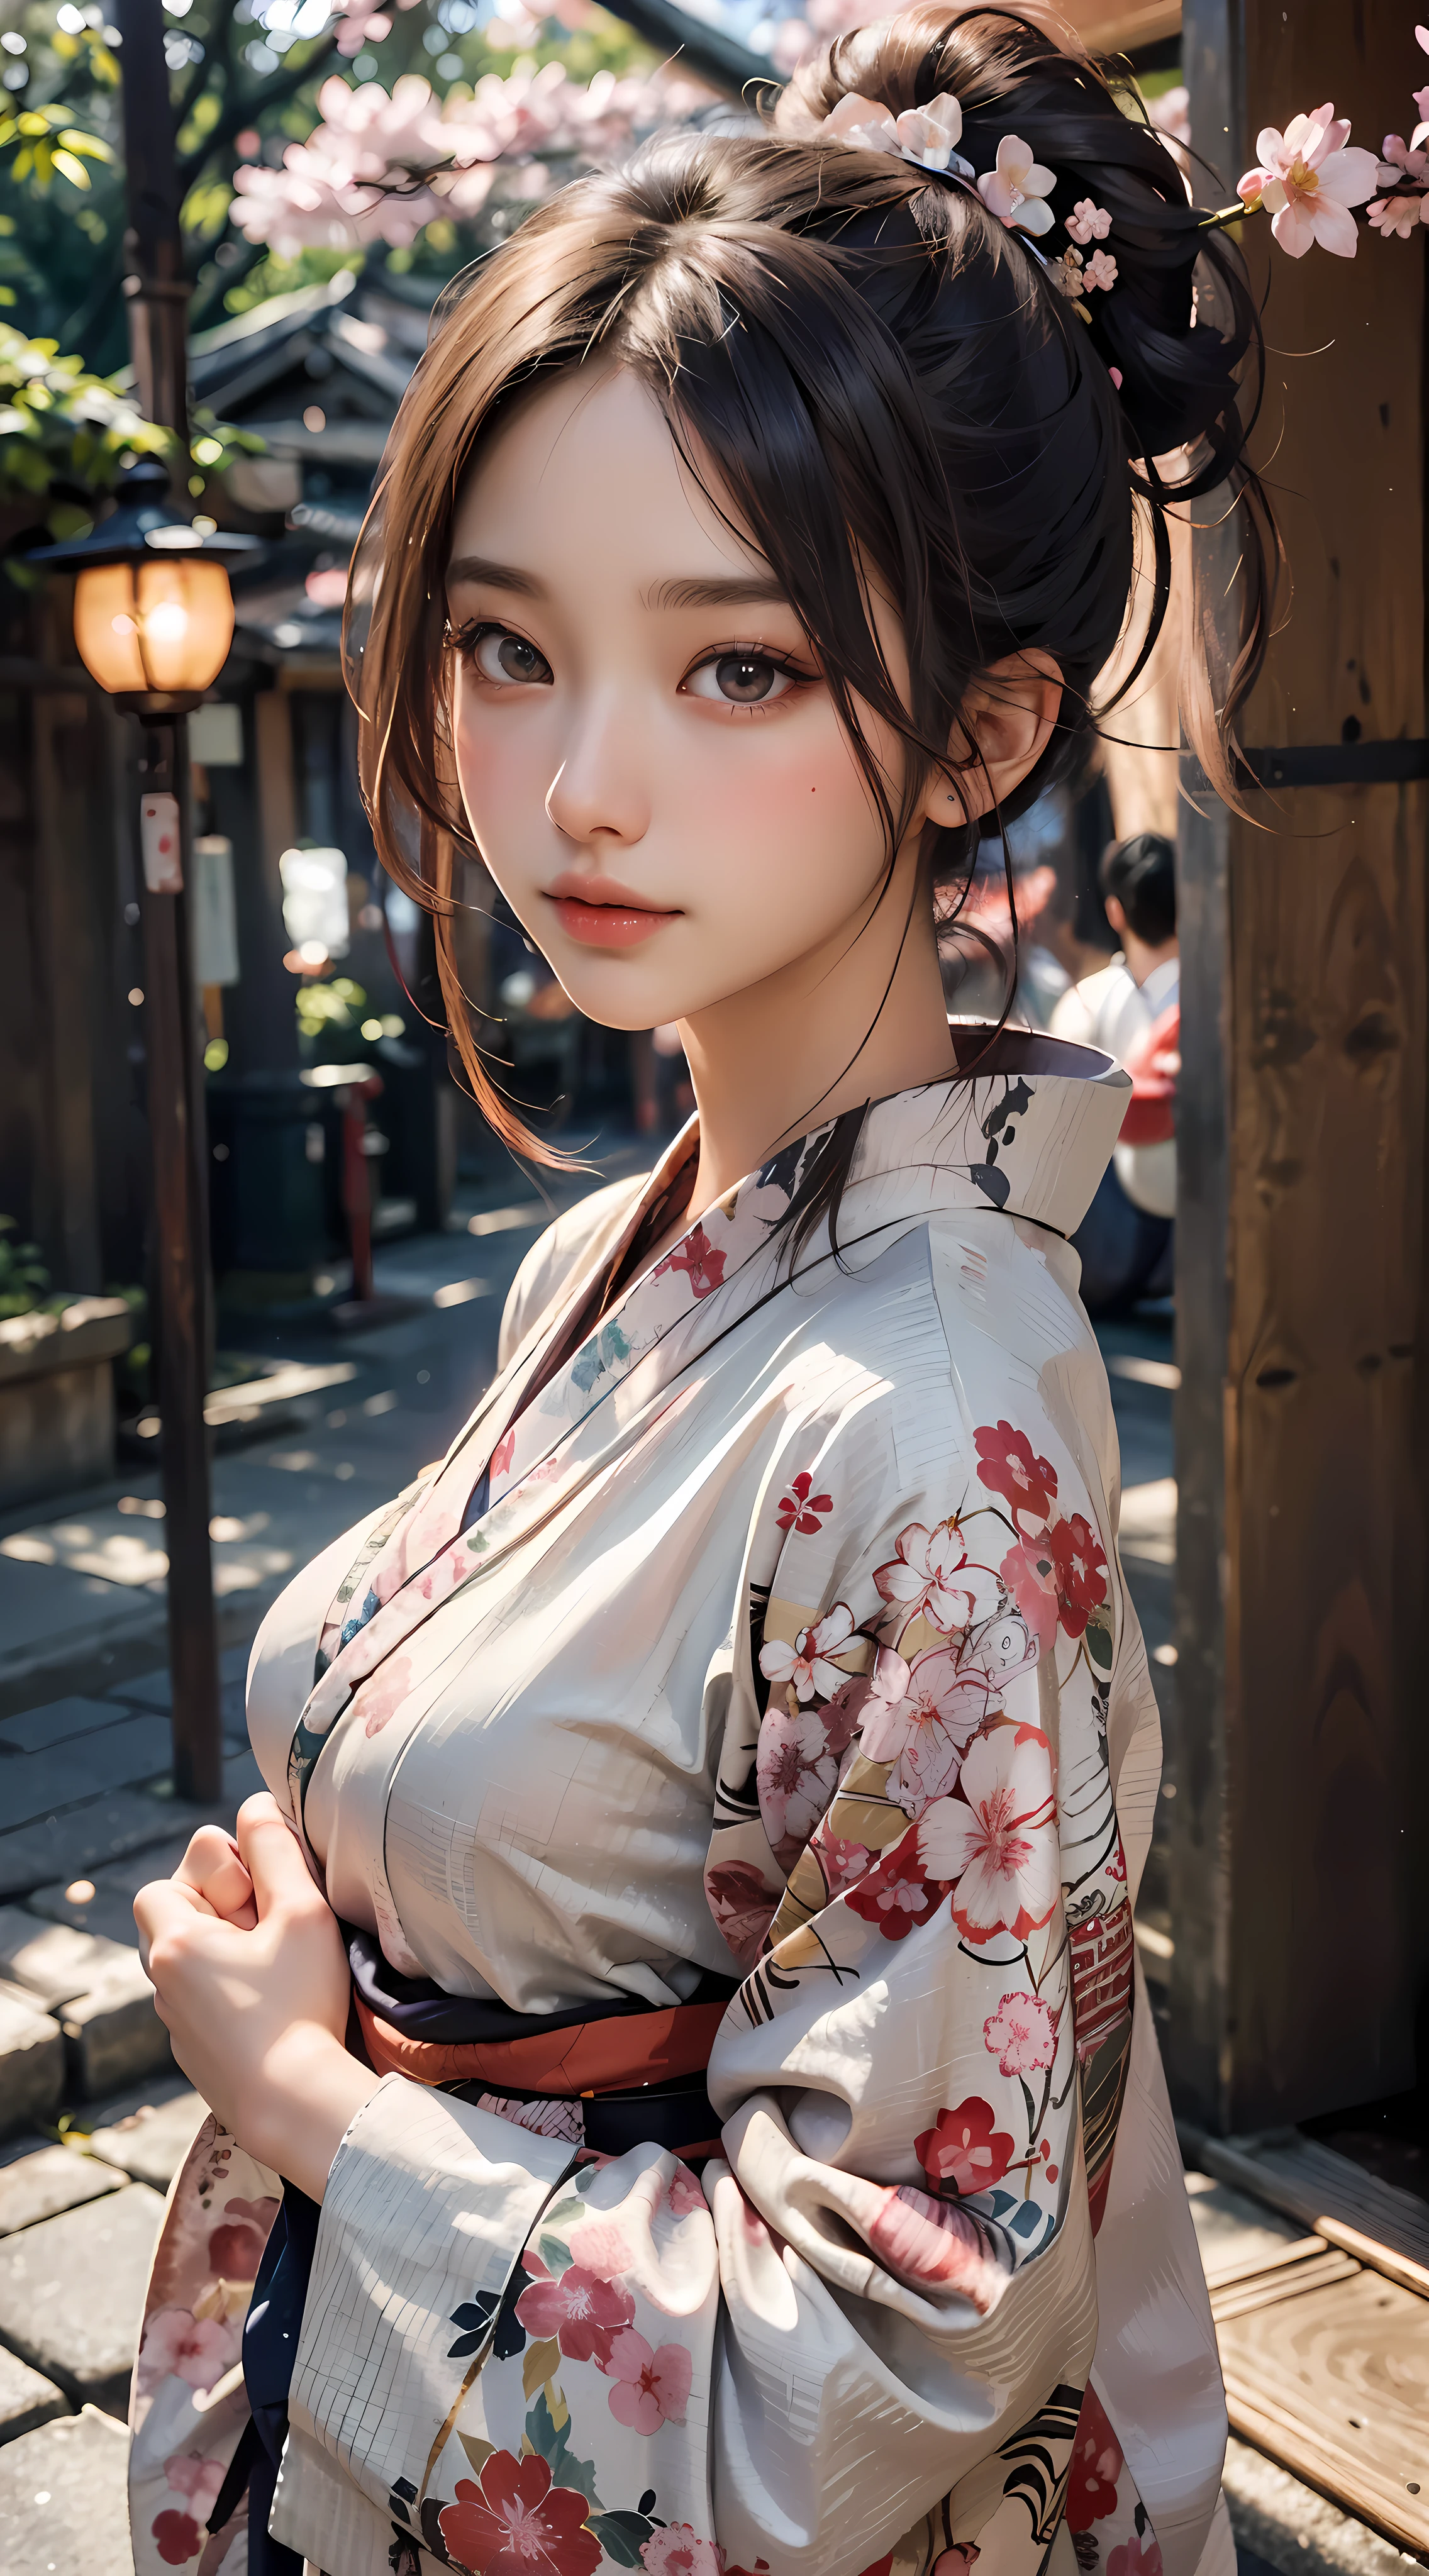 (Japan kimono with cherry blossom pattern:1.3), symmetrical, Compositions with coloful geometric arabesque patternun hair, dark brown hari), (top-quality, Photorealsitic:1.4, RAW Photography:1.2, cinematric light, very detailed illustration), (1woman:1.3, solo), (asian girl, ultra delicate face, ultra Beautiful fece, ultra delicate eyes, ultra detailed nouse, ultra detailed mouth, ultra detailed facial features), petite woman, (midium breast:1.3), from the front side, skiny, lipgloss, a smile, full body view, high detailed, high resolution, 8k, masterpiece 2:1, skin glow, radiant skin, young girl, falling sakura flowers